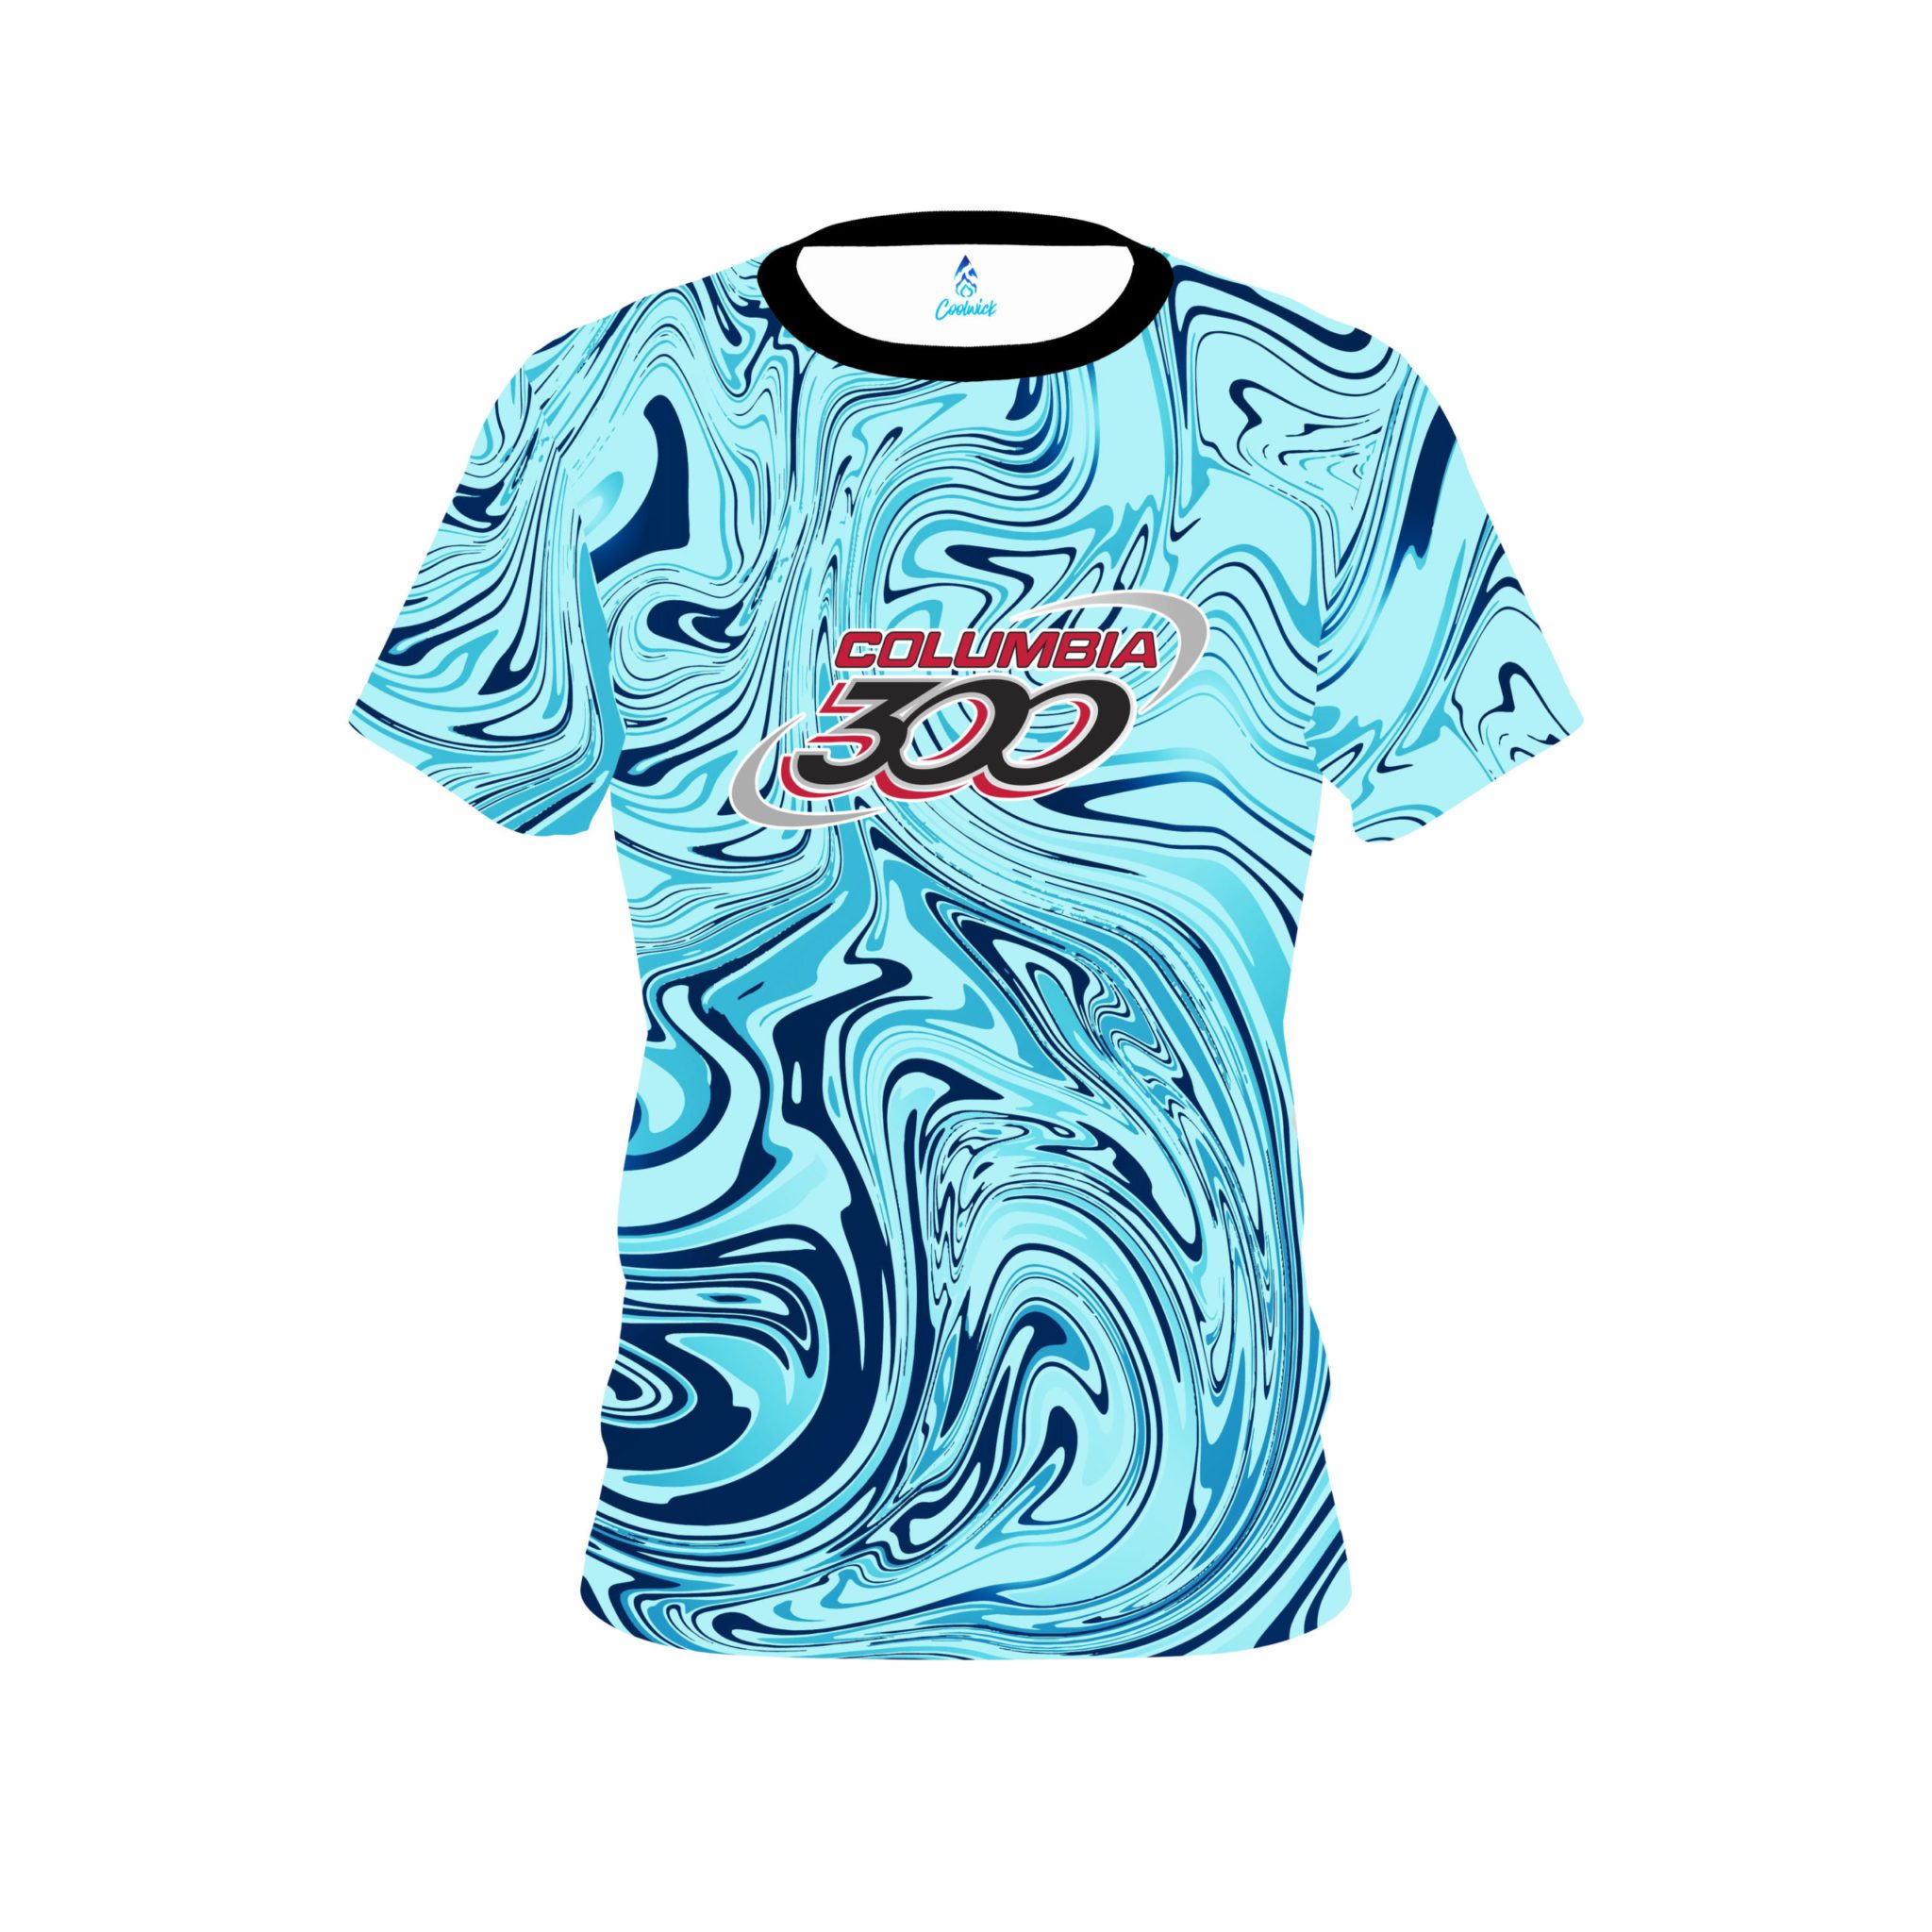 Columbia 300 Blue Hallucinate CoolWick Bowling Jersey